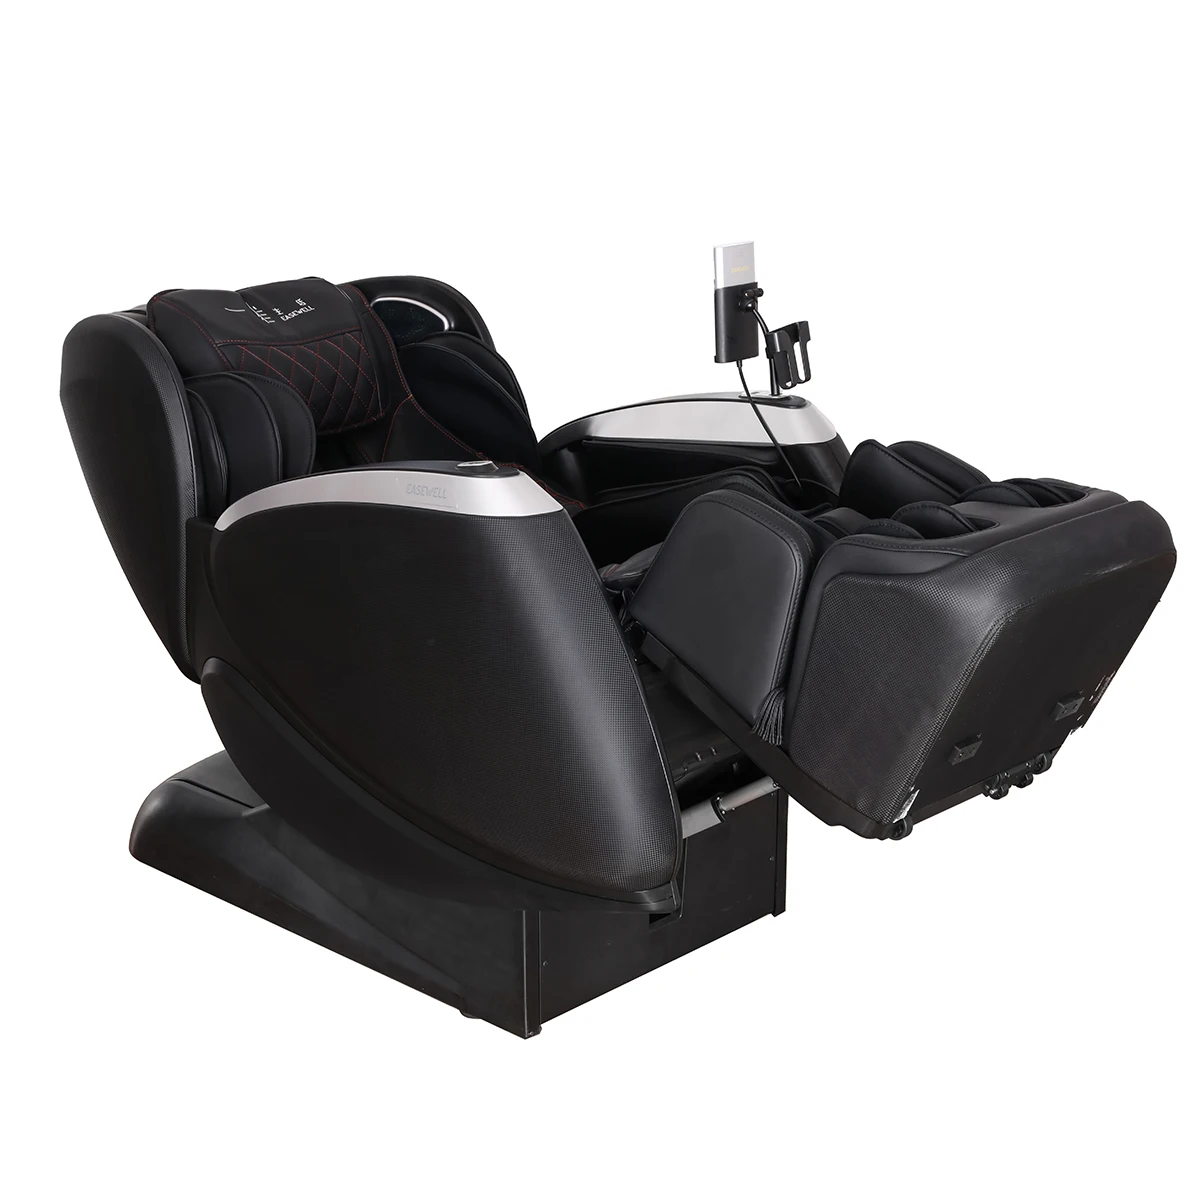 
2021 4D zero gravity EASEWELL luxury 3D massage chair of Full body Thai stretch and hot compress foot massage 